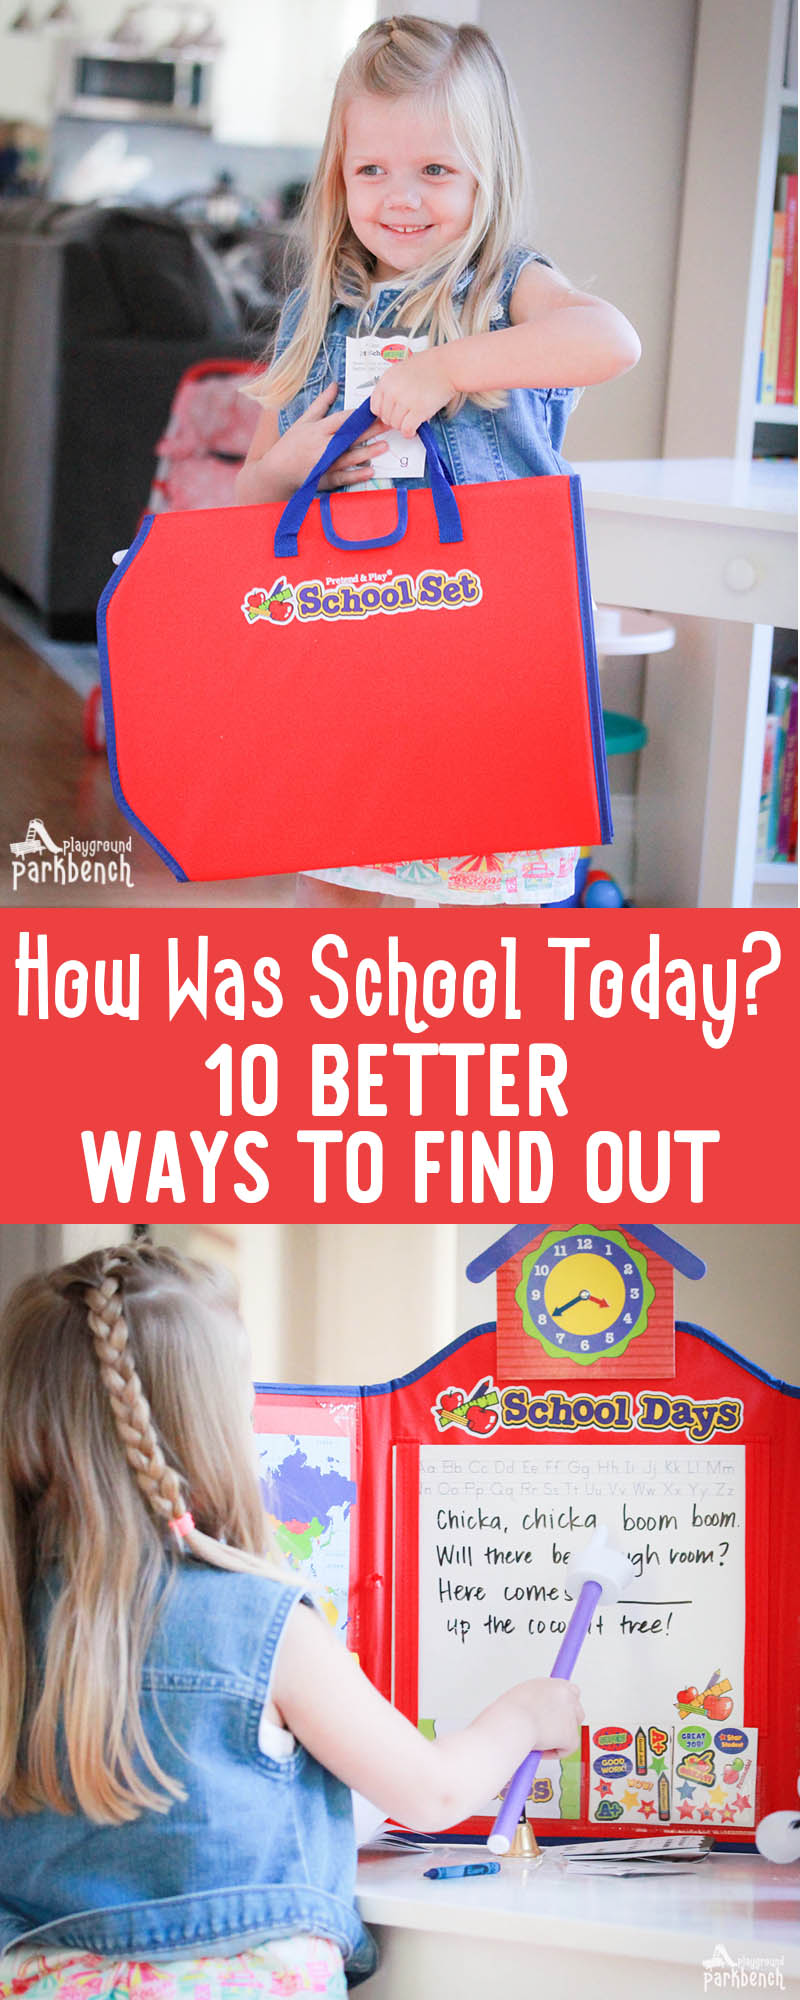 When you ask "How was school today?" do you get simple one word answers? Want to know how to get your kid talking more? Try these 10 better ways to get them talking about their day away from you... start when they are in kindergarten, and keep them talking when they are older and it matters most! | Parenting | Parenting Tips |